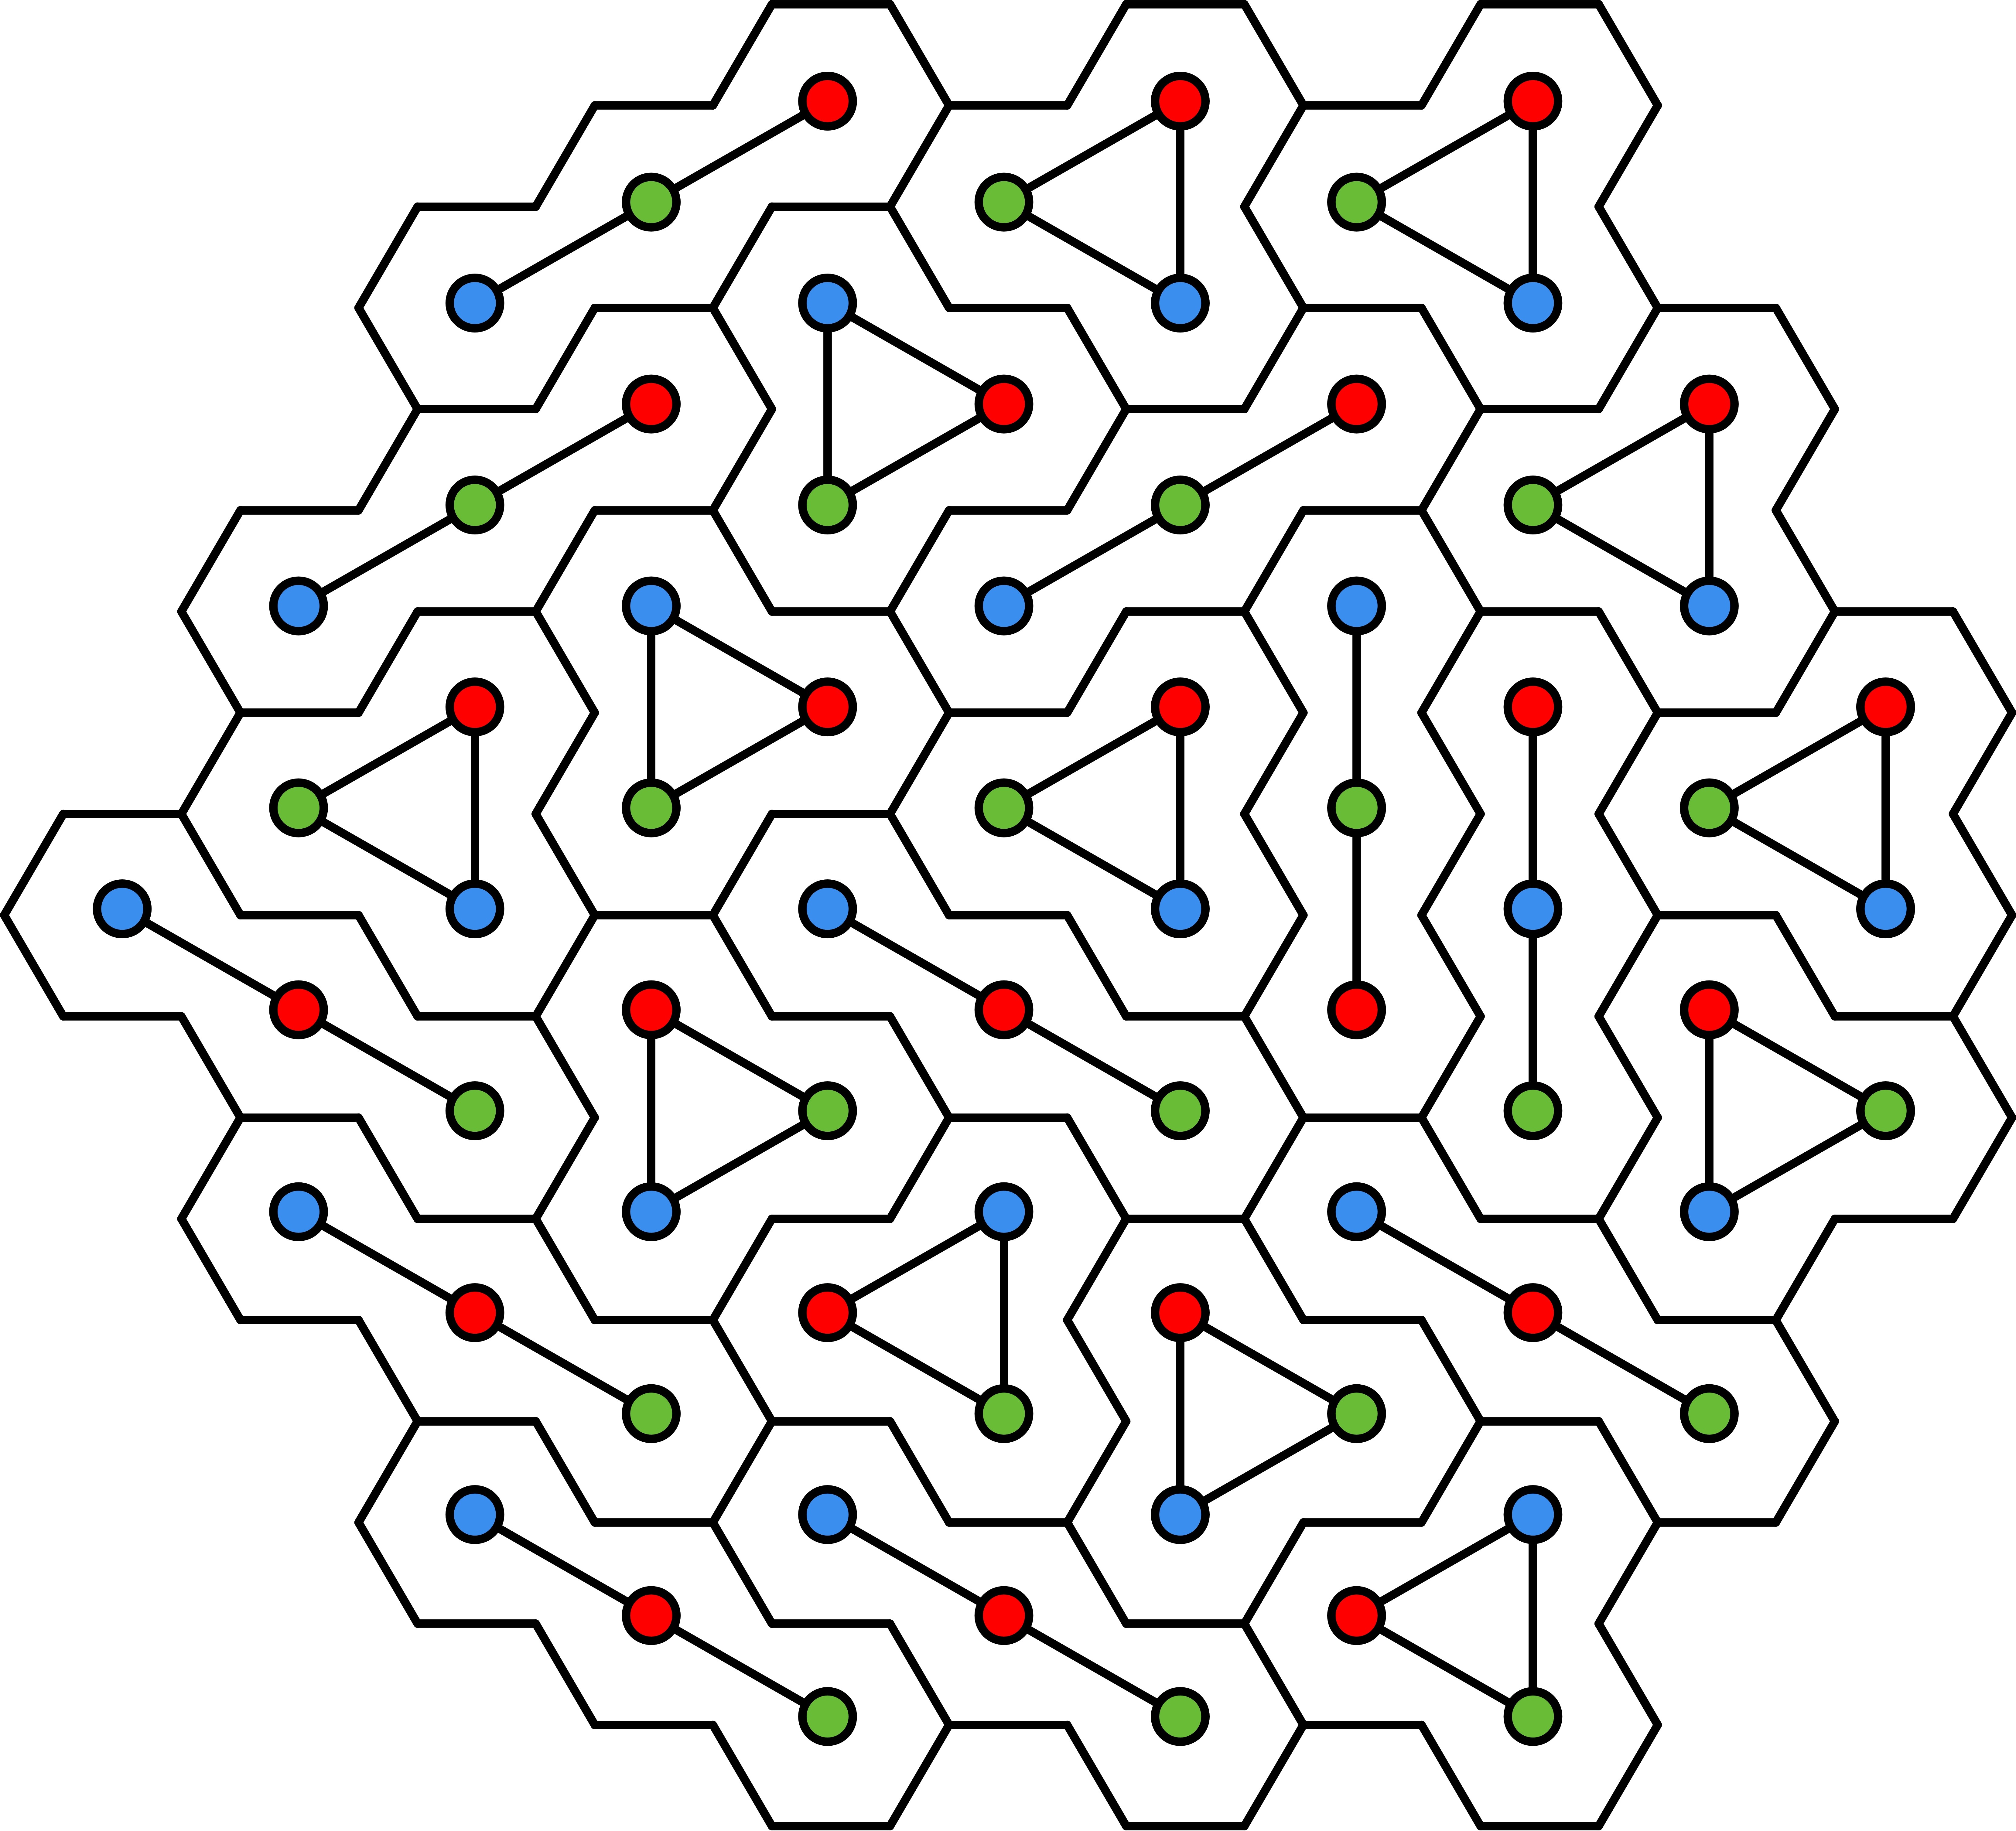 The (9,9)-benzel tiled by stones and bones and 
the associated trimer cover of the (9,9)-benzel graph